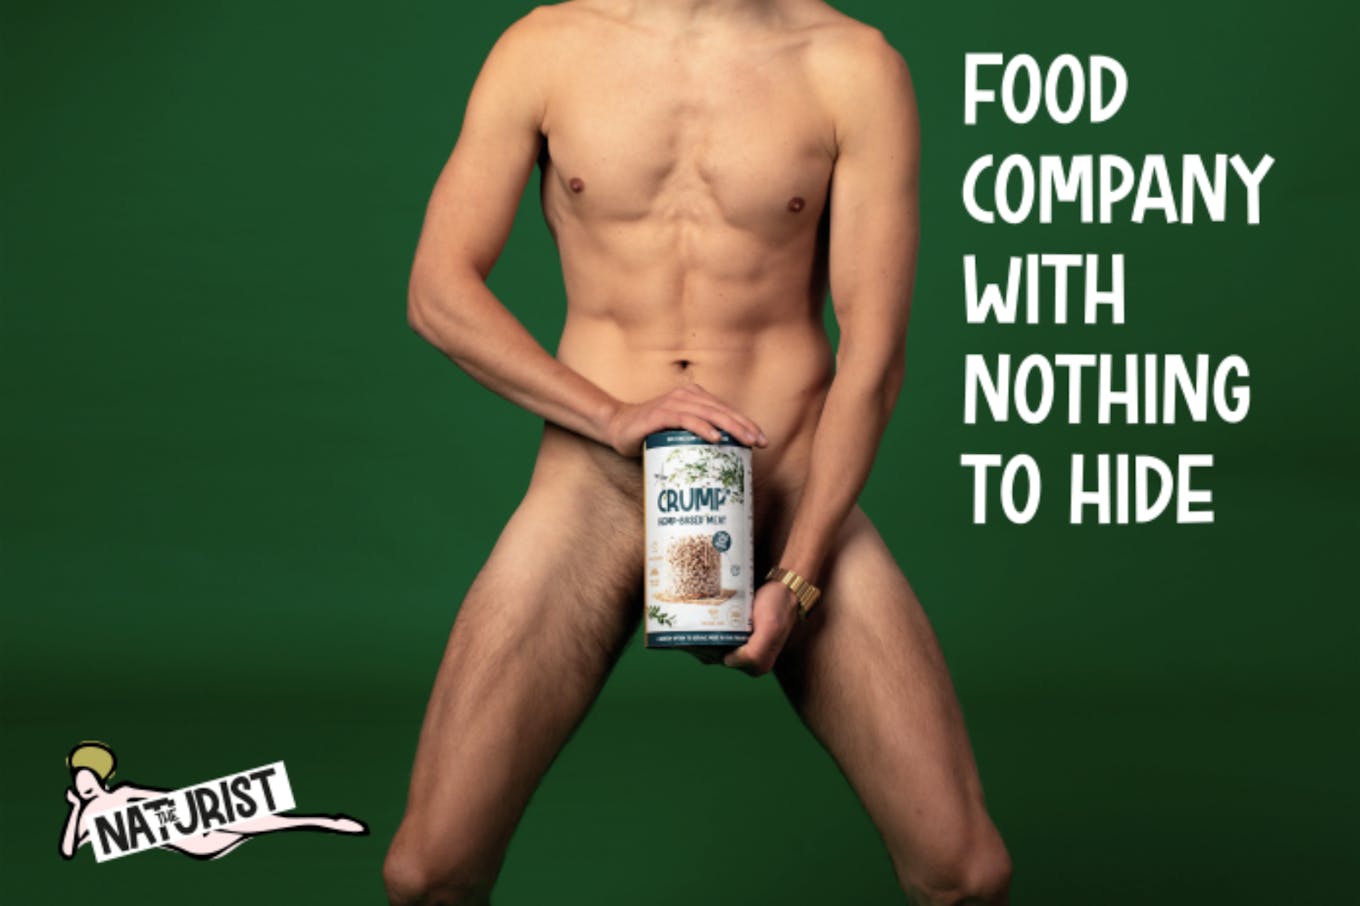 Food company with nothing to hide: The Naturist